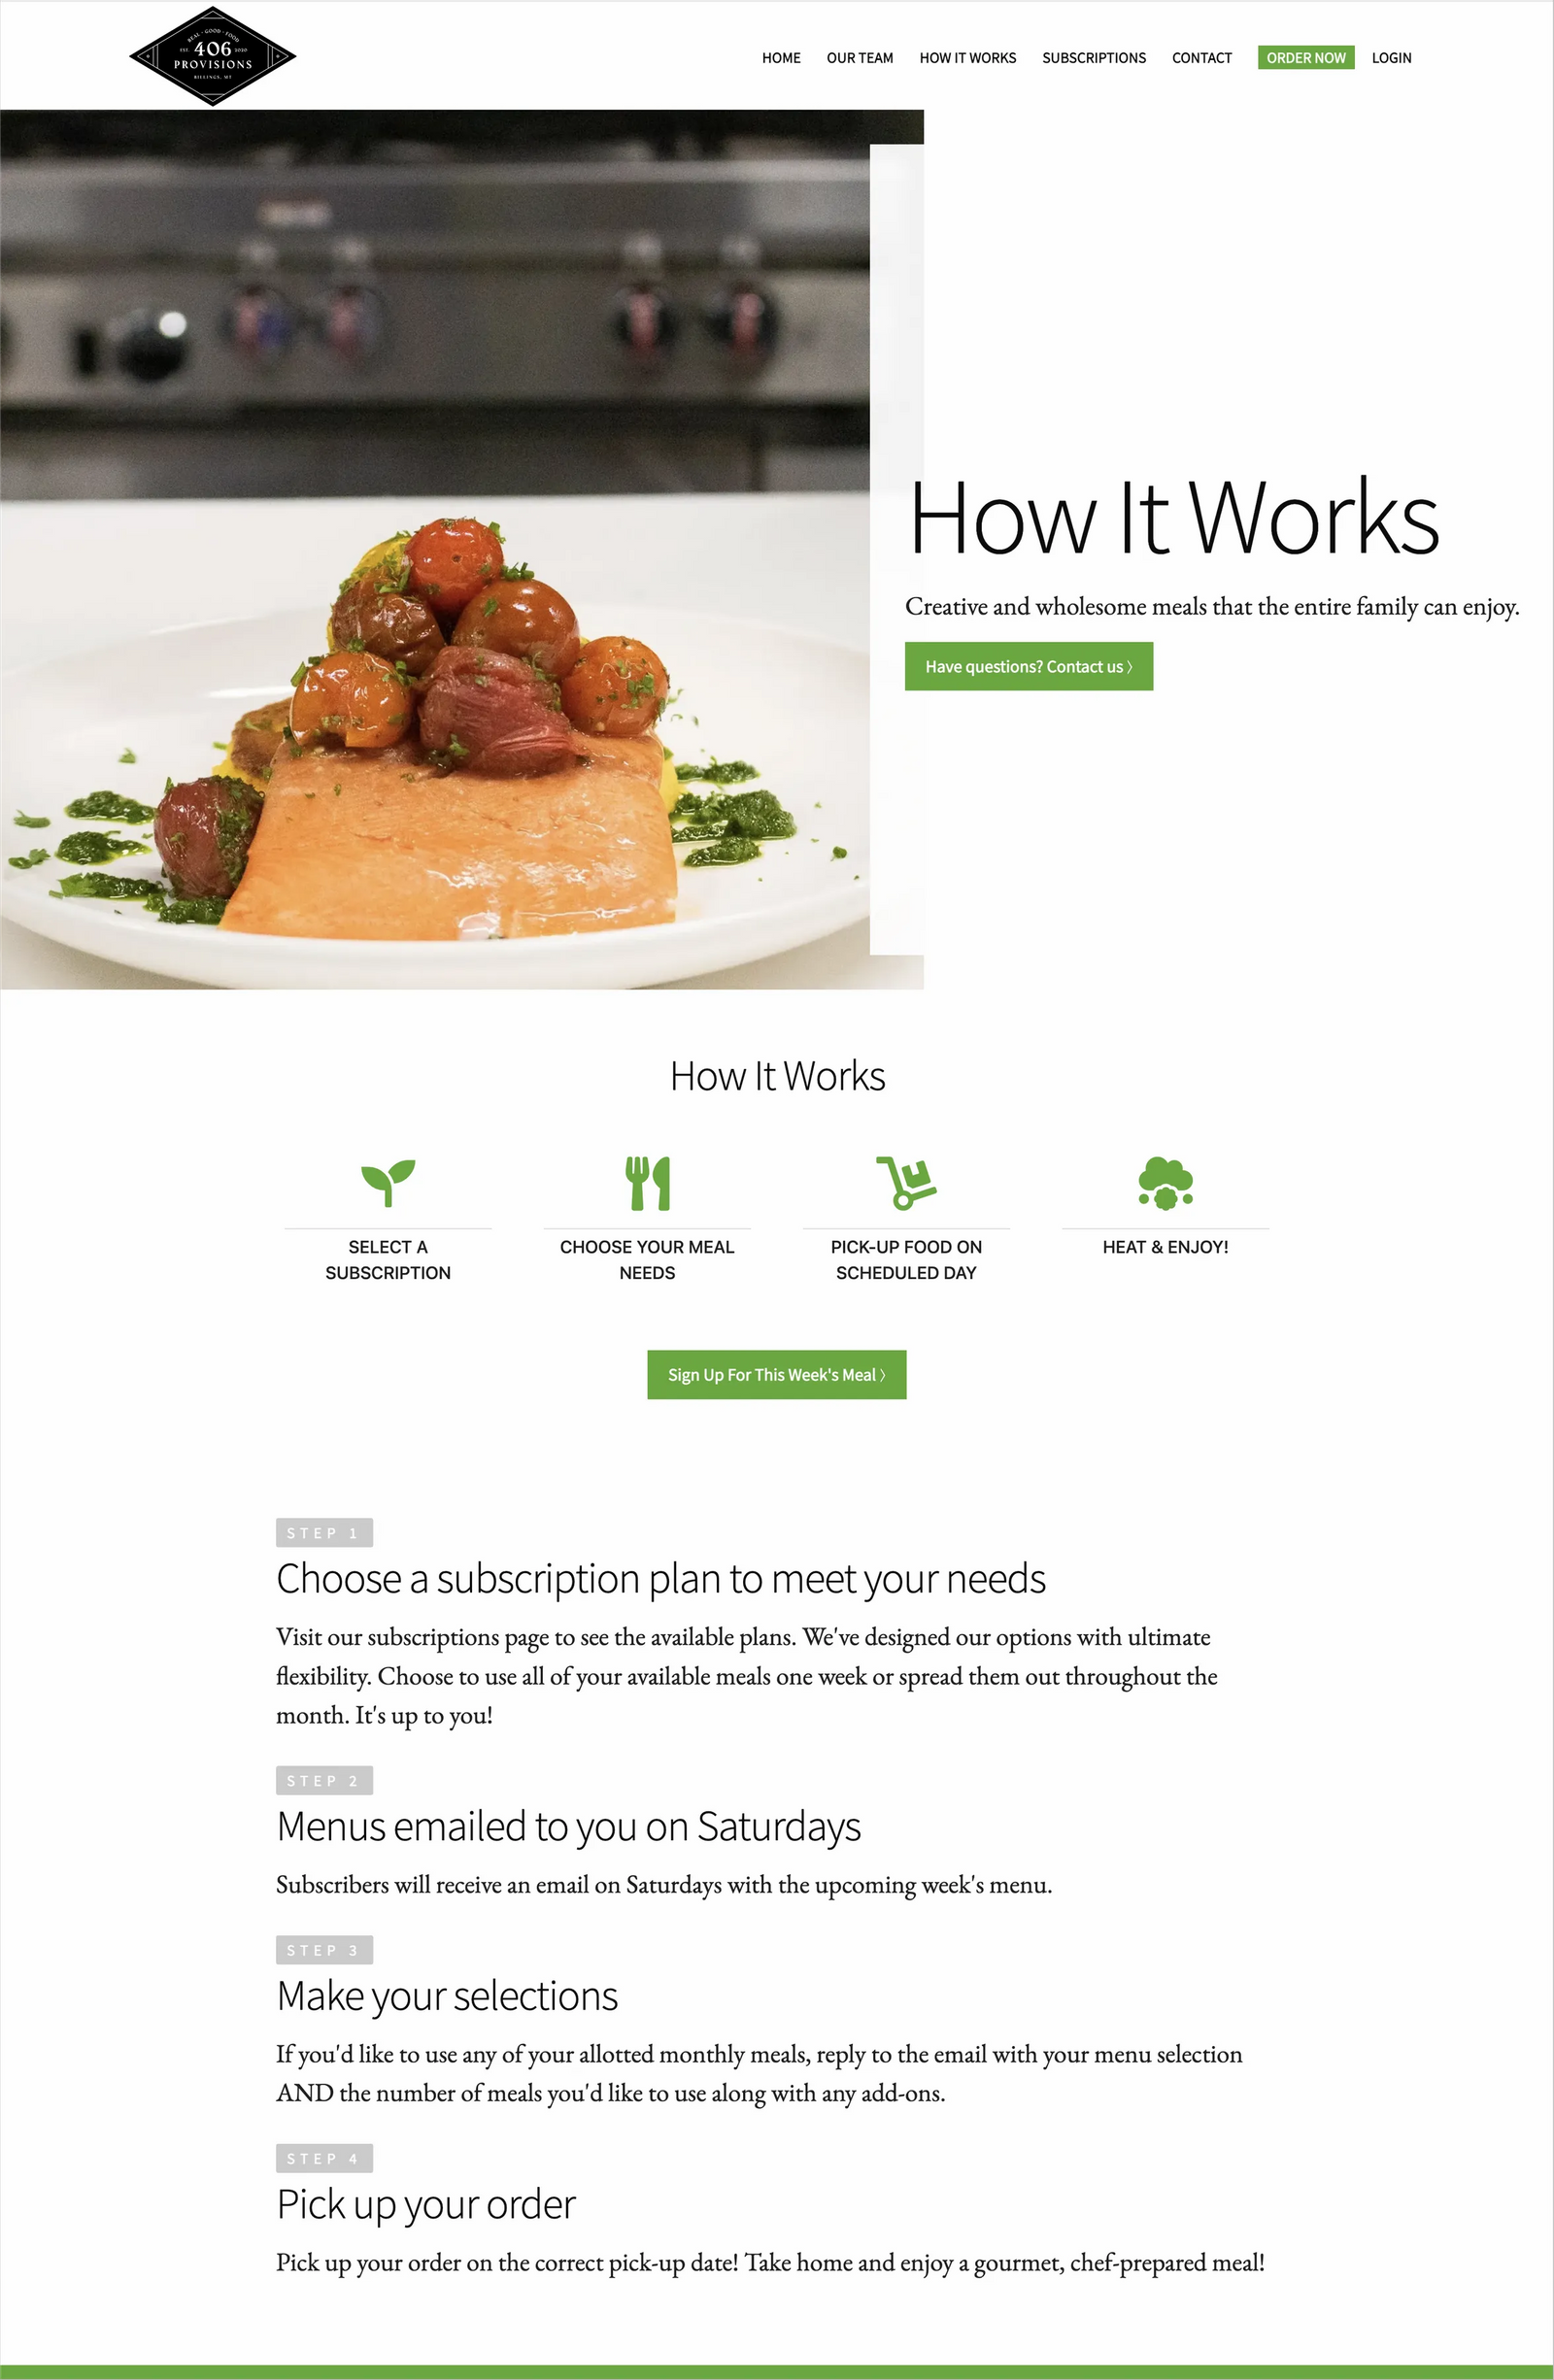 example of effective website "how it works" page detailing the steps of the food service